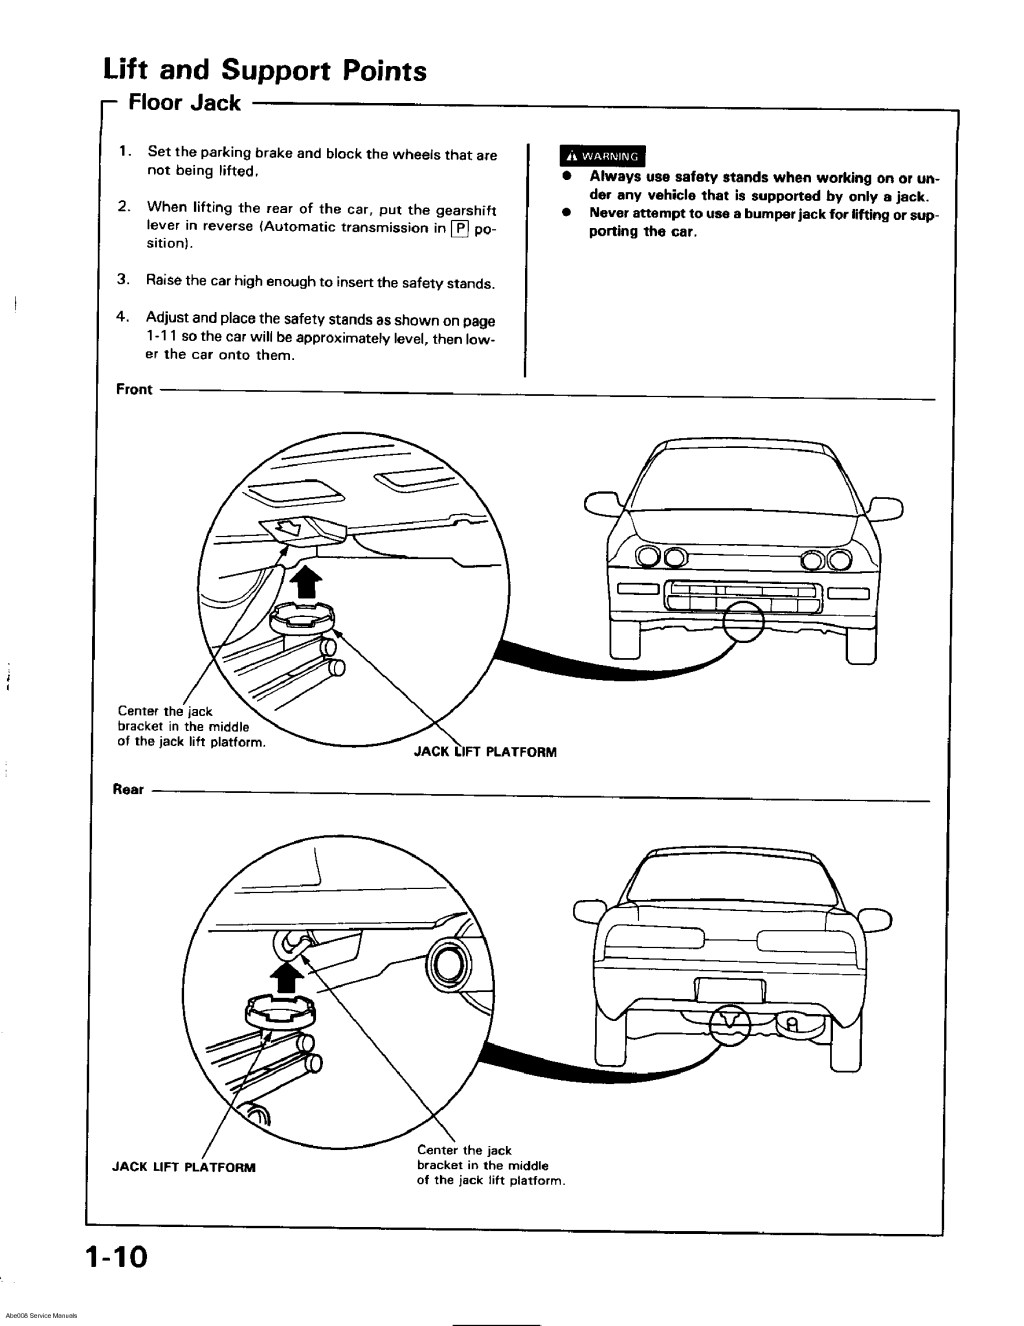 Picture of: Acura Integra  –  Service Manual – Downloads – Hondahookup